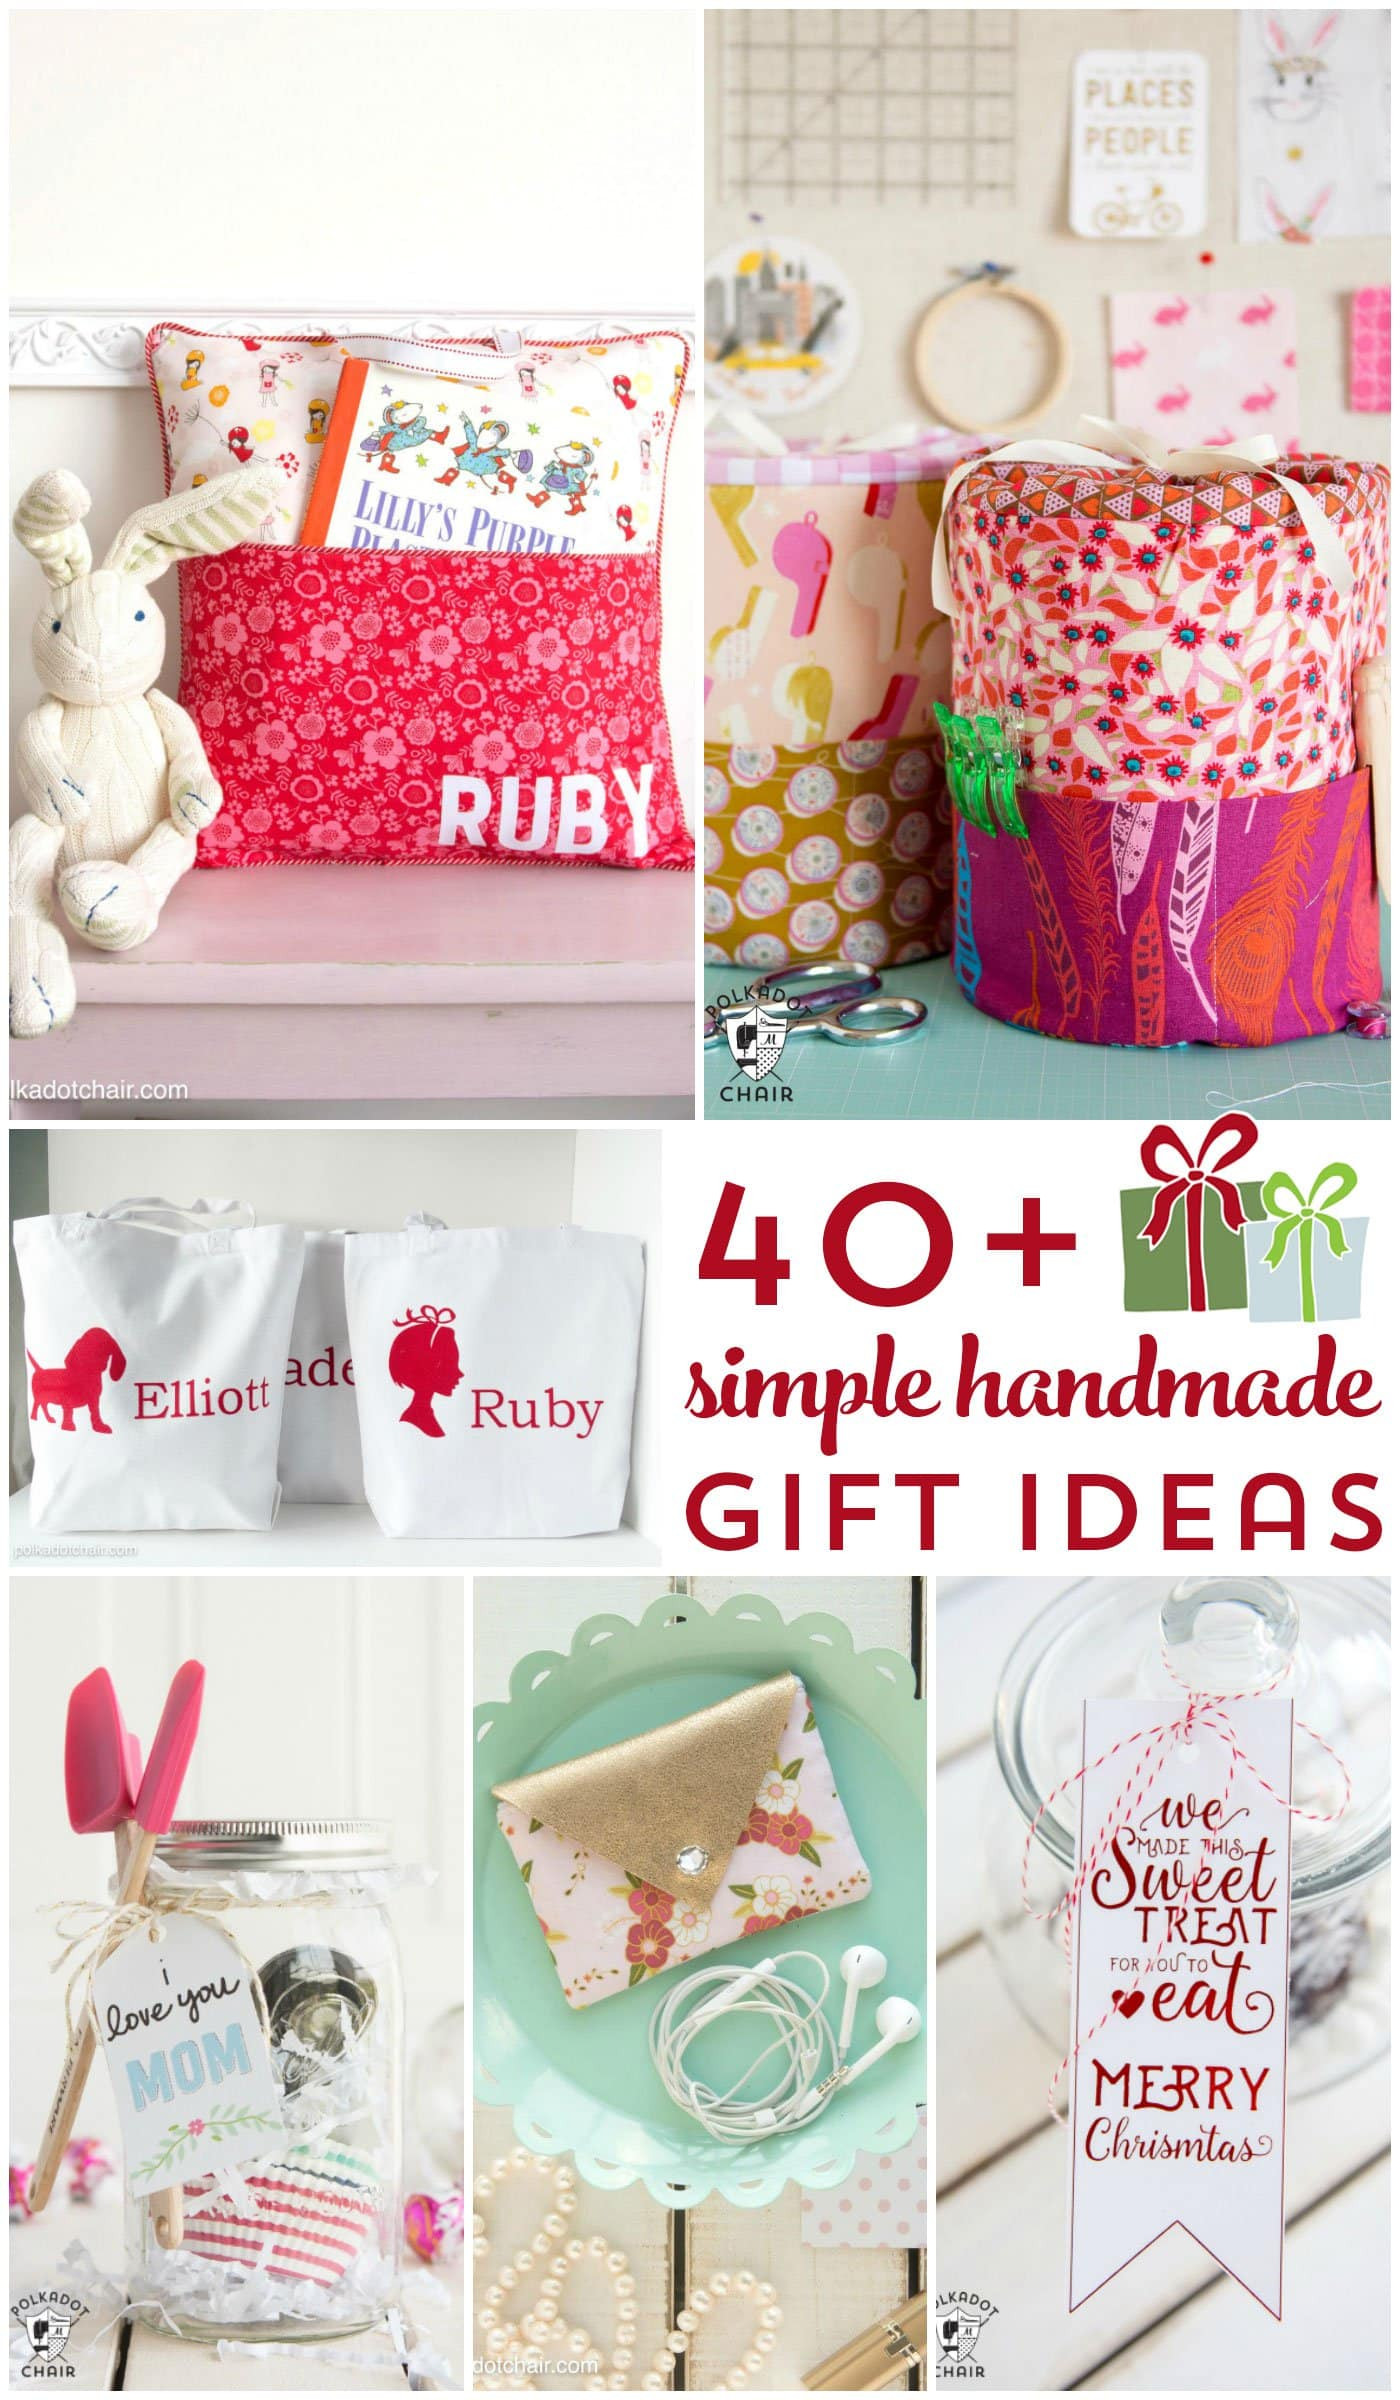 Easy Craft Gift Ideas
 More than 40 Simple Handmade Gift Ideas The Polka Dot Chair